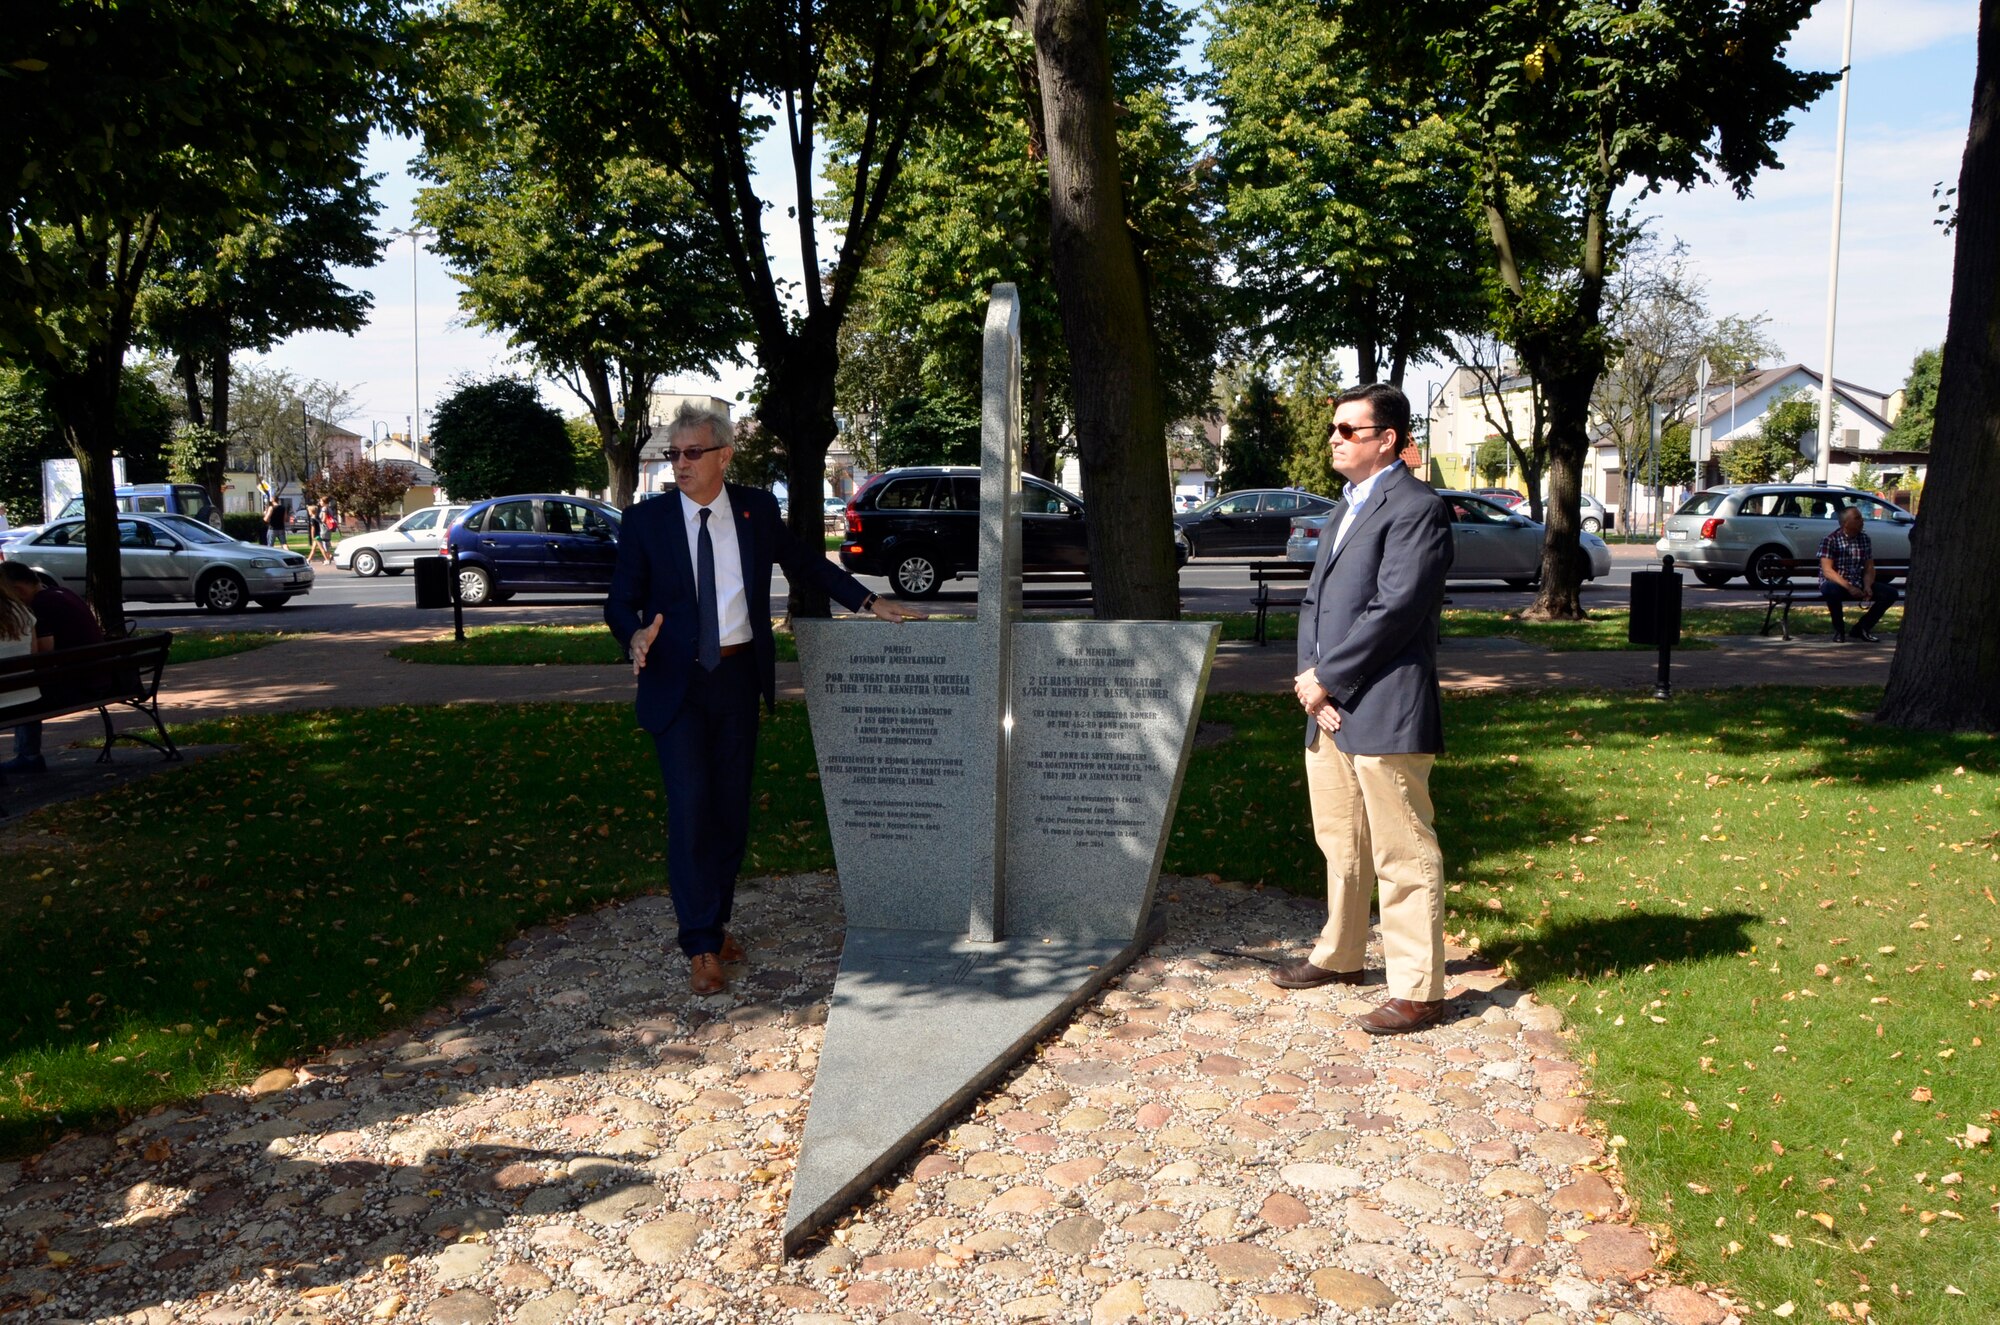 Konstantynow Lodzki, Poland -- Henryk Brzyszcz, left, mayor of Konstantynow Lodzki, tells the story of a WWII U.S. bomber crew that went down here March 15, 1945, killing two of the seven on board. Mayor Brzyszcz invited Lt. Col. Kristofer Padilla, 52nd Operations Group Detachment 1 commander, based out of Lask Air Base, Poland, and members of the South Dakota Air National Guard, 114th Fighter Wing to participate in a memorial service honoring the WWII U.S. bomber crew Sept. 4. (U.S. Air National Guard photo by Capt. Amy Rittberger/Released)